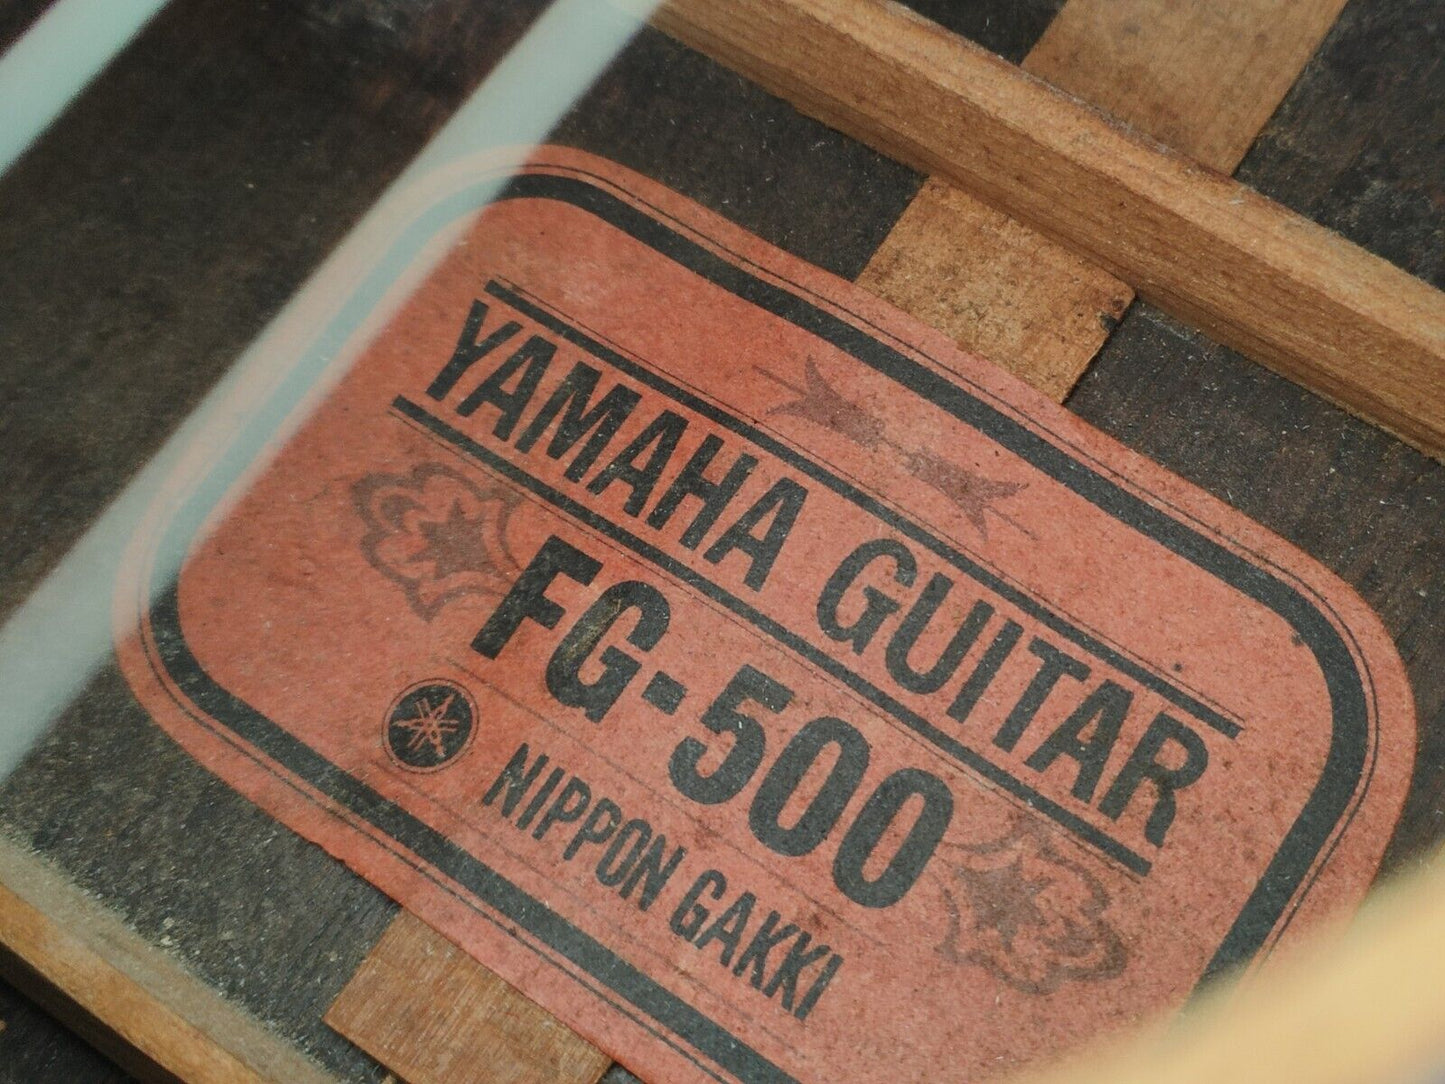 1970 Yamaha FG-500 Red Label Dreadnought Acoustic Guitar